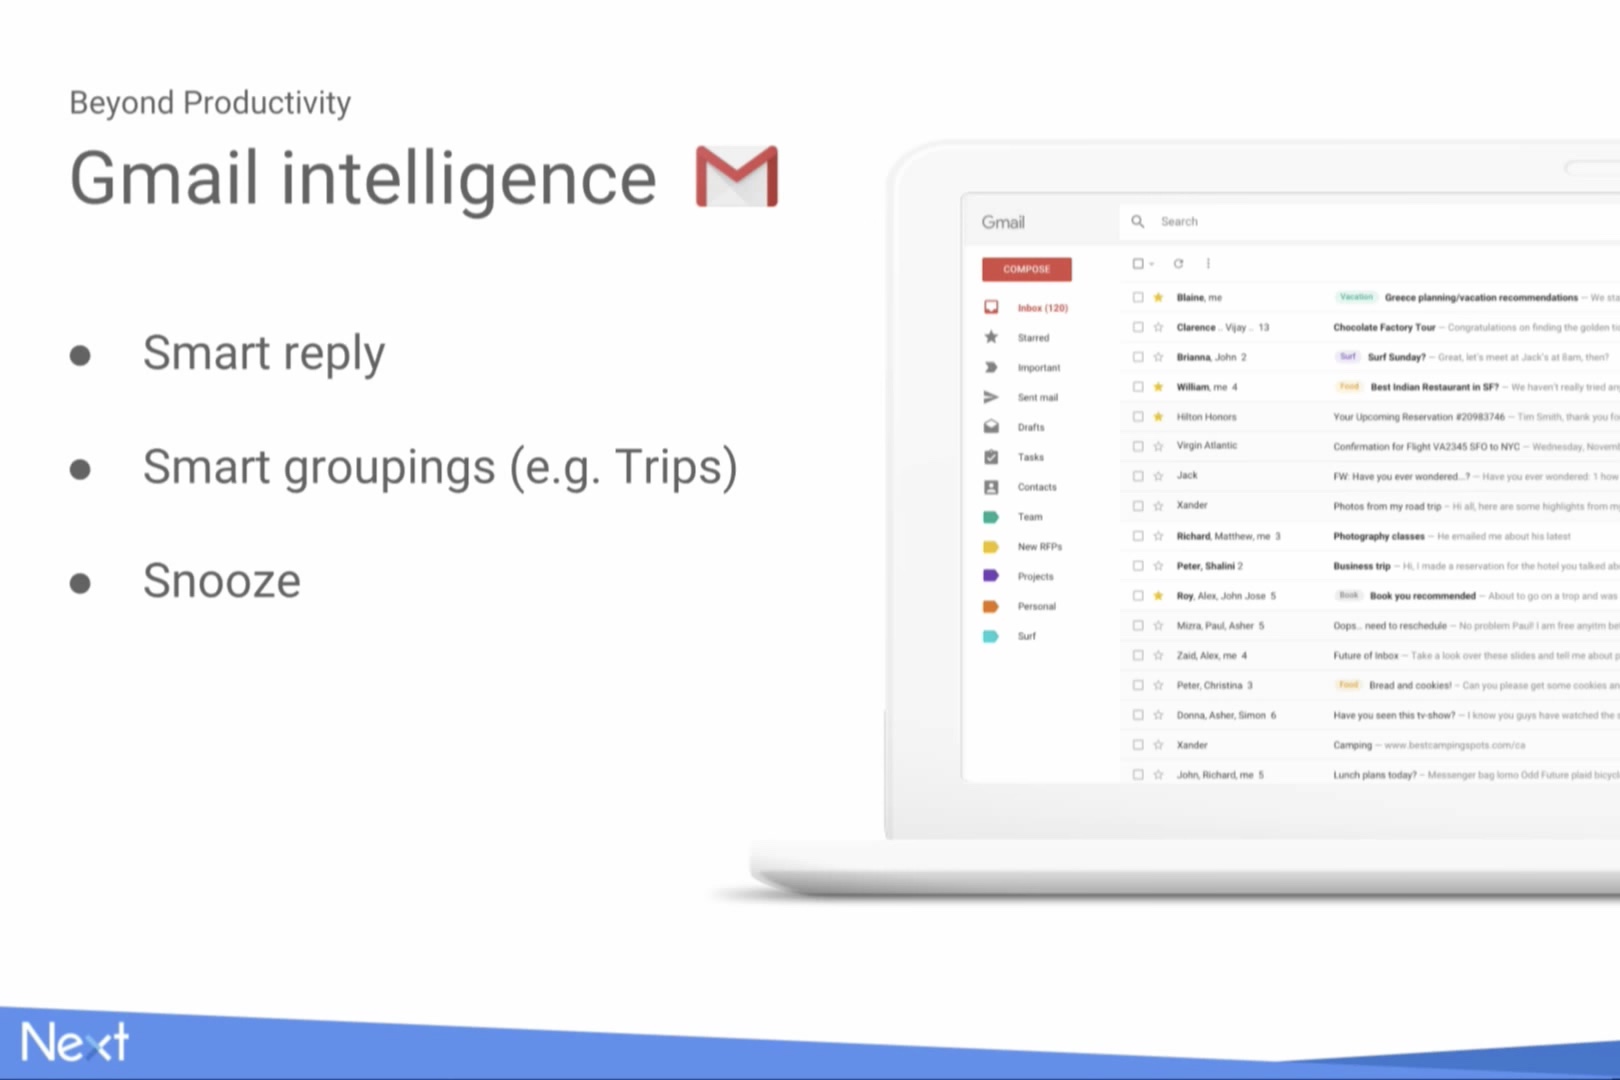 AppNations,Apps,Gmail,Gmail redesign,Google,news,